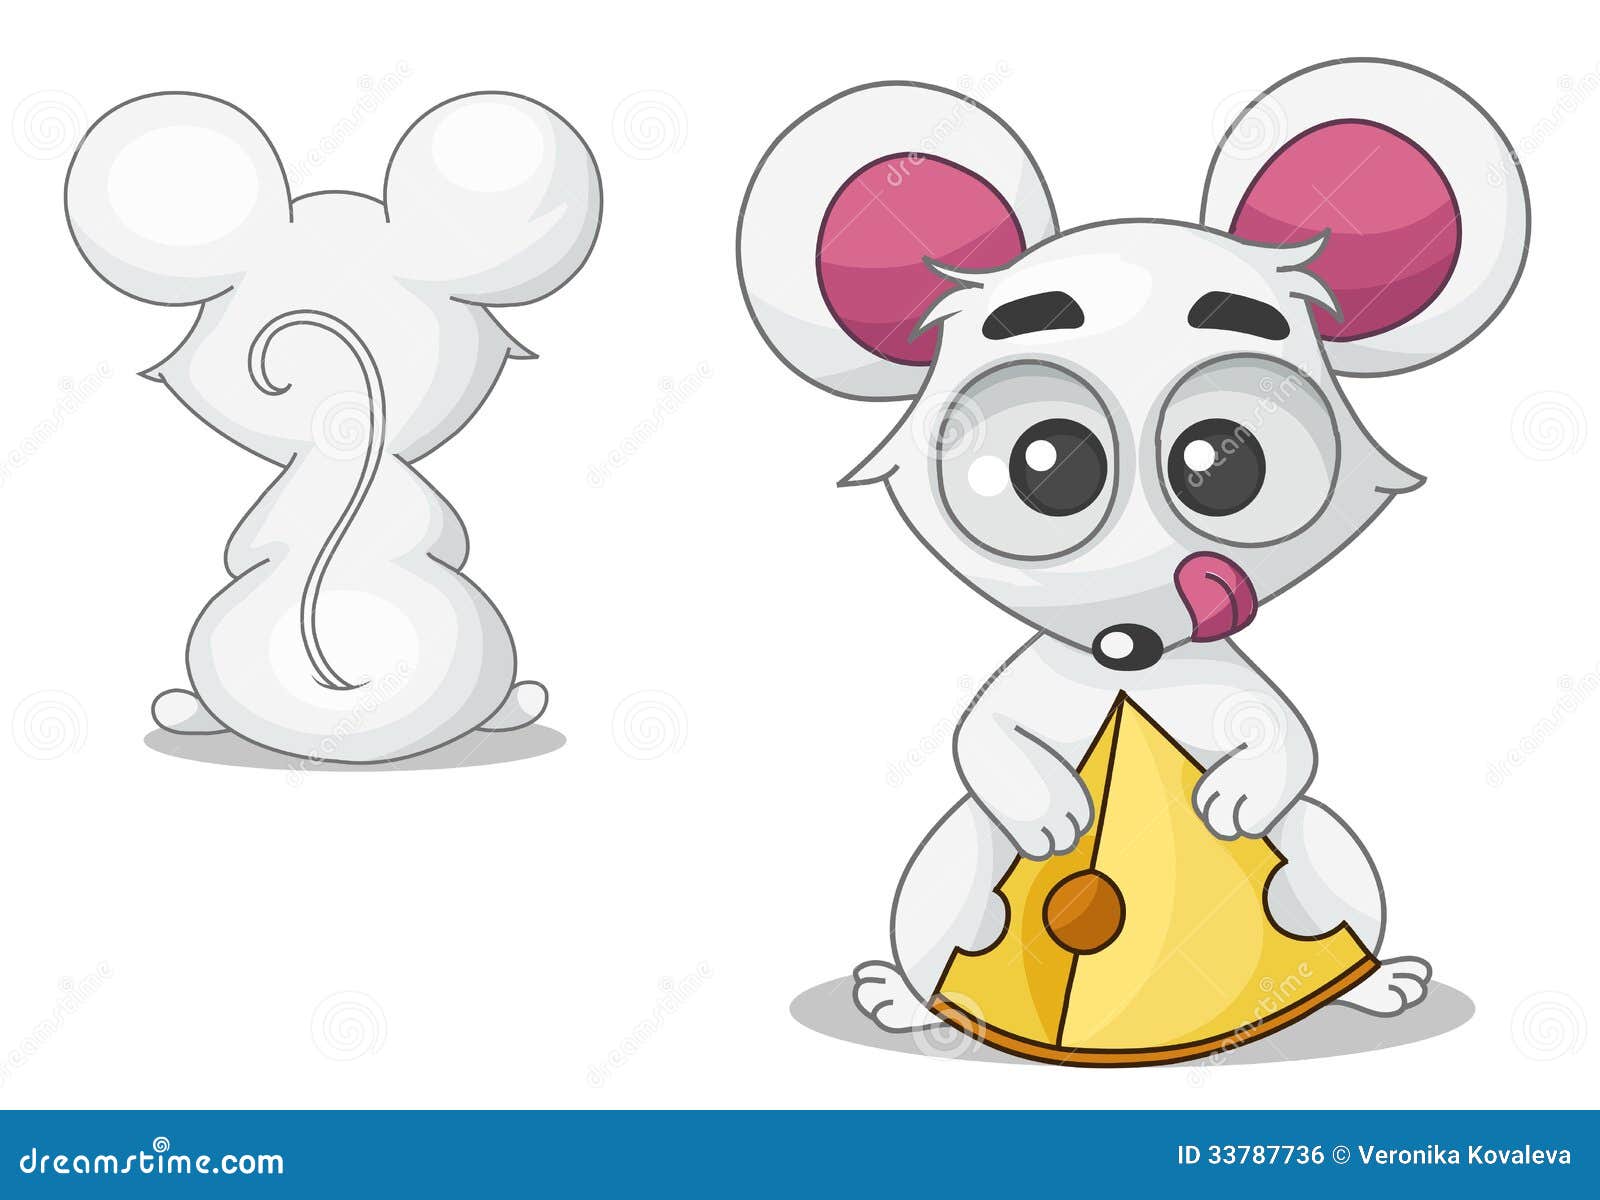 clipart mouse eating cheese - photo #20